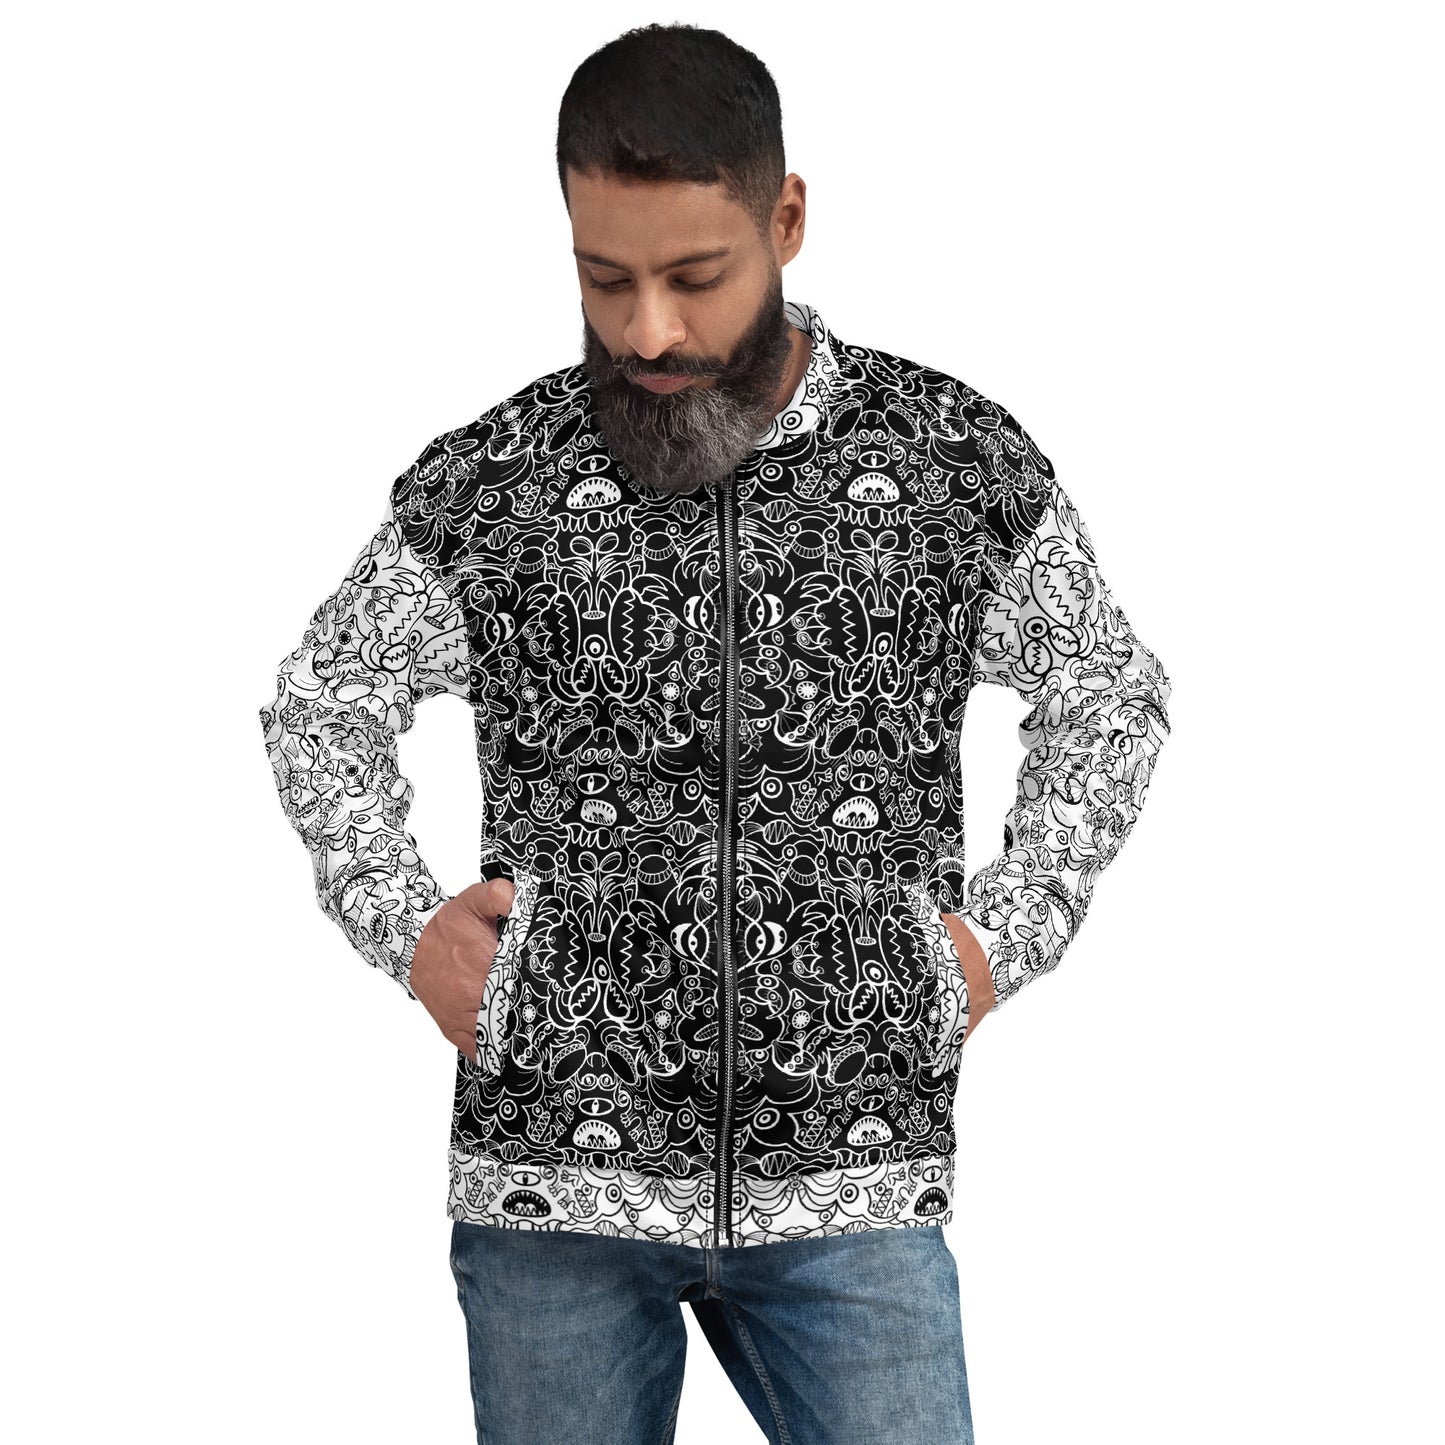 The Powerful Dark Side of the Doodle World - Unisex Bomber Jacket. Front view